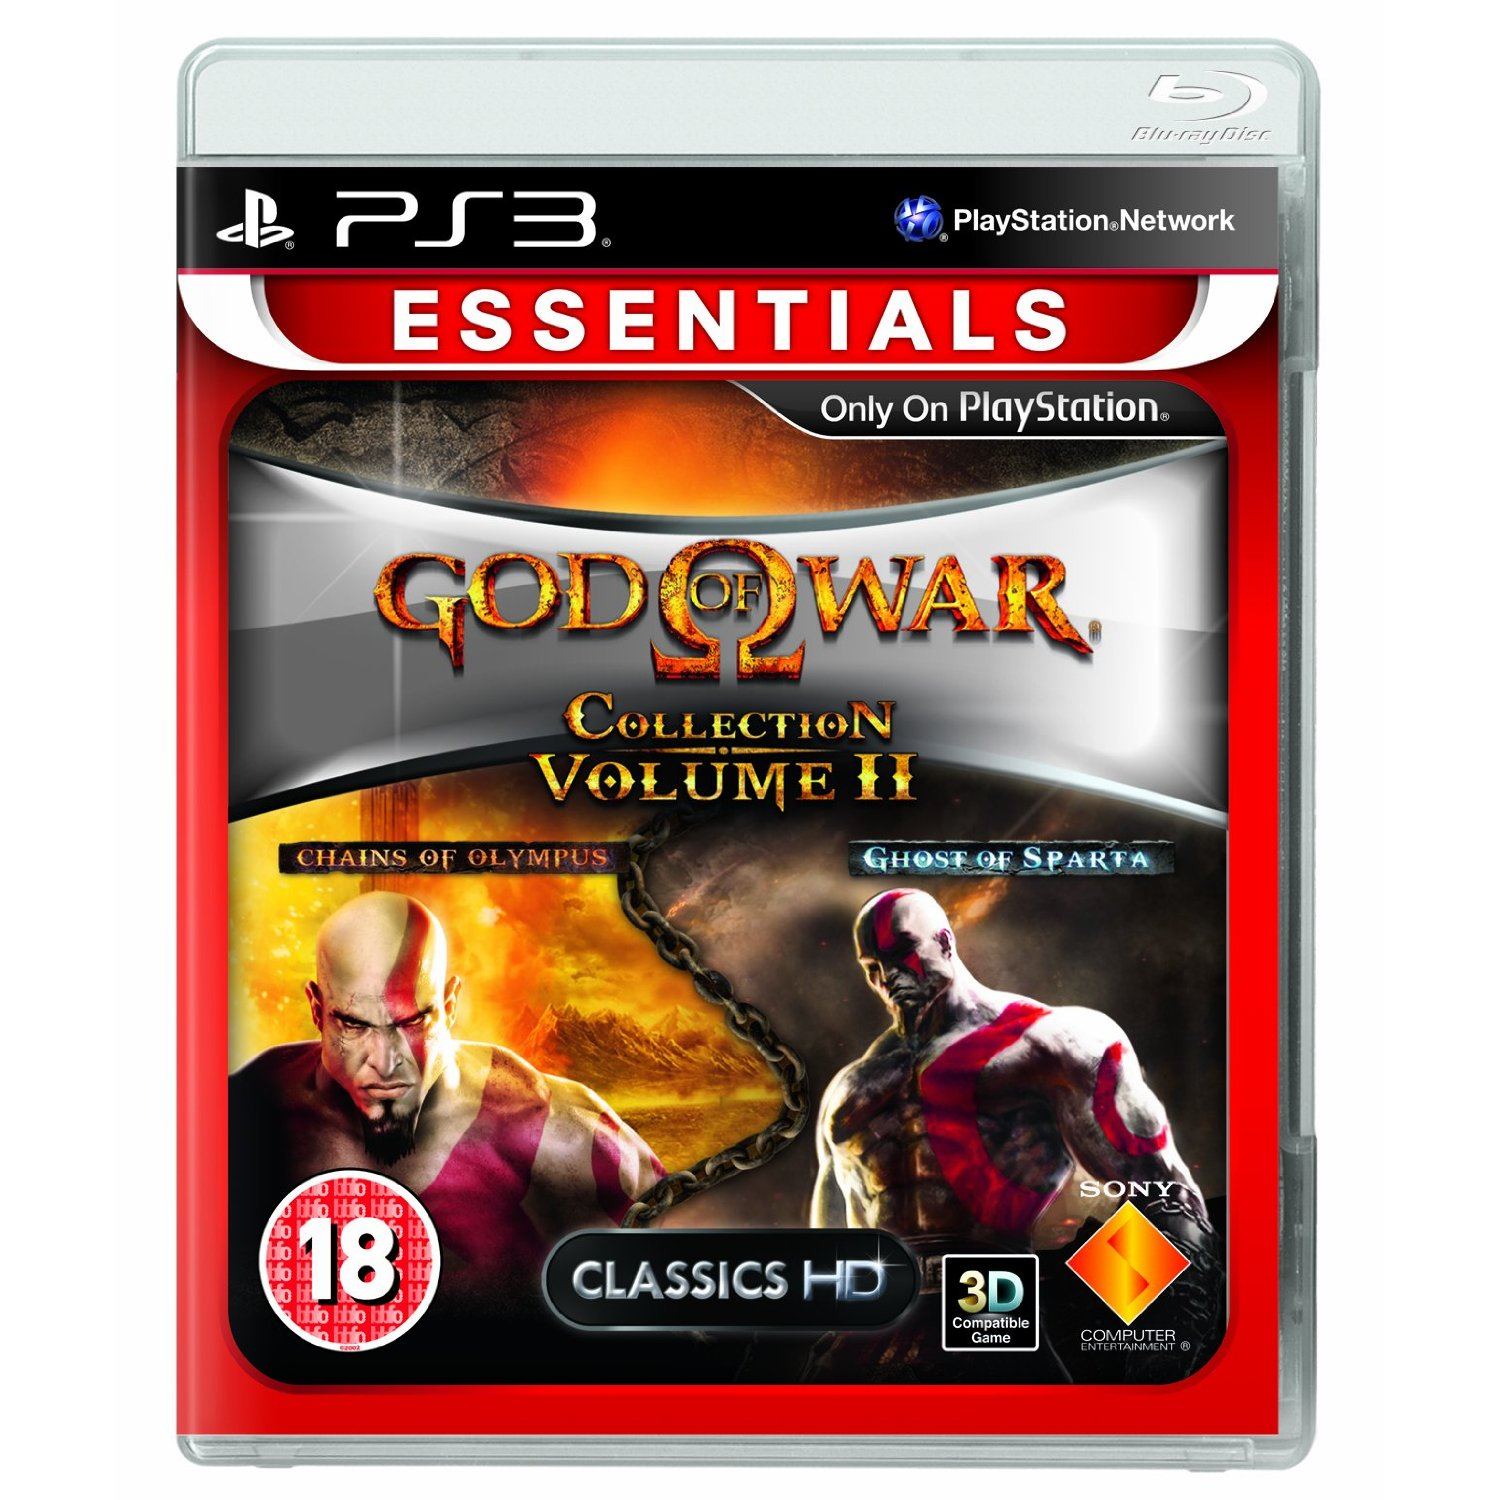 Review: God of War HD Collection: Volume 2